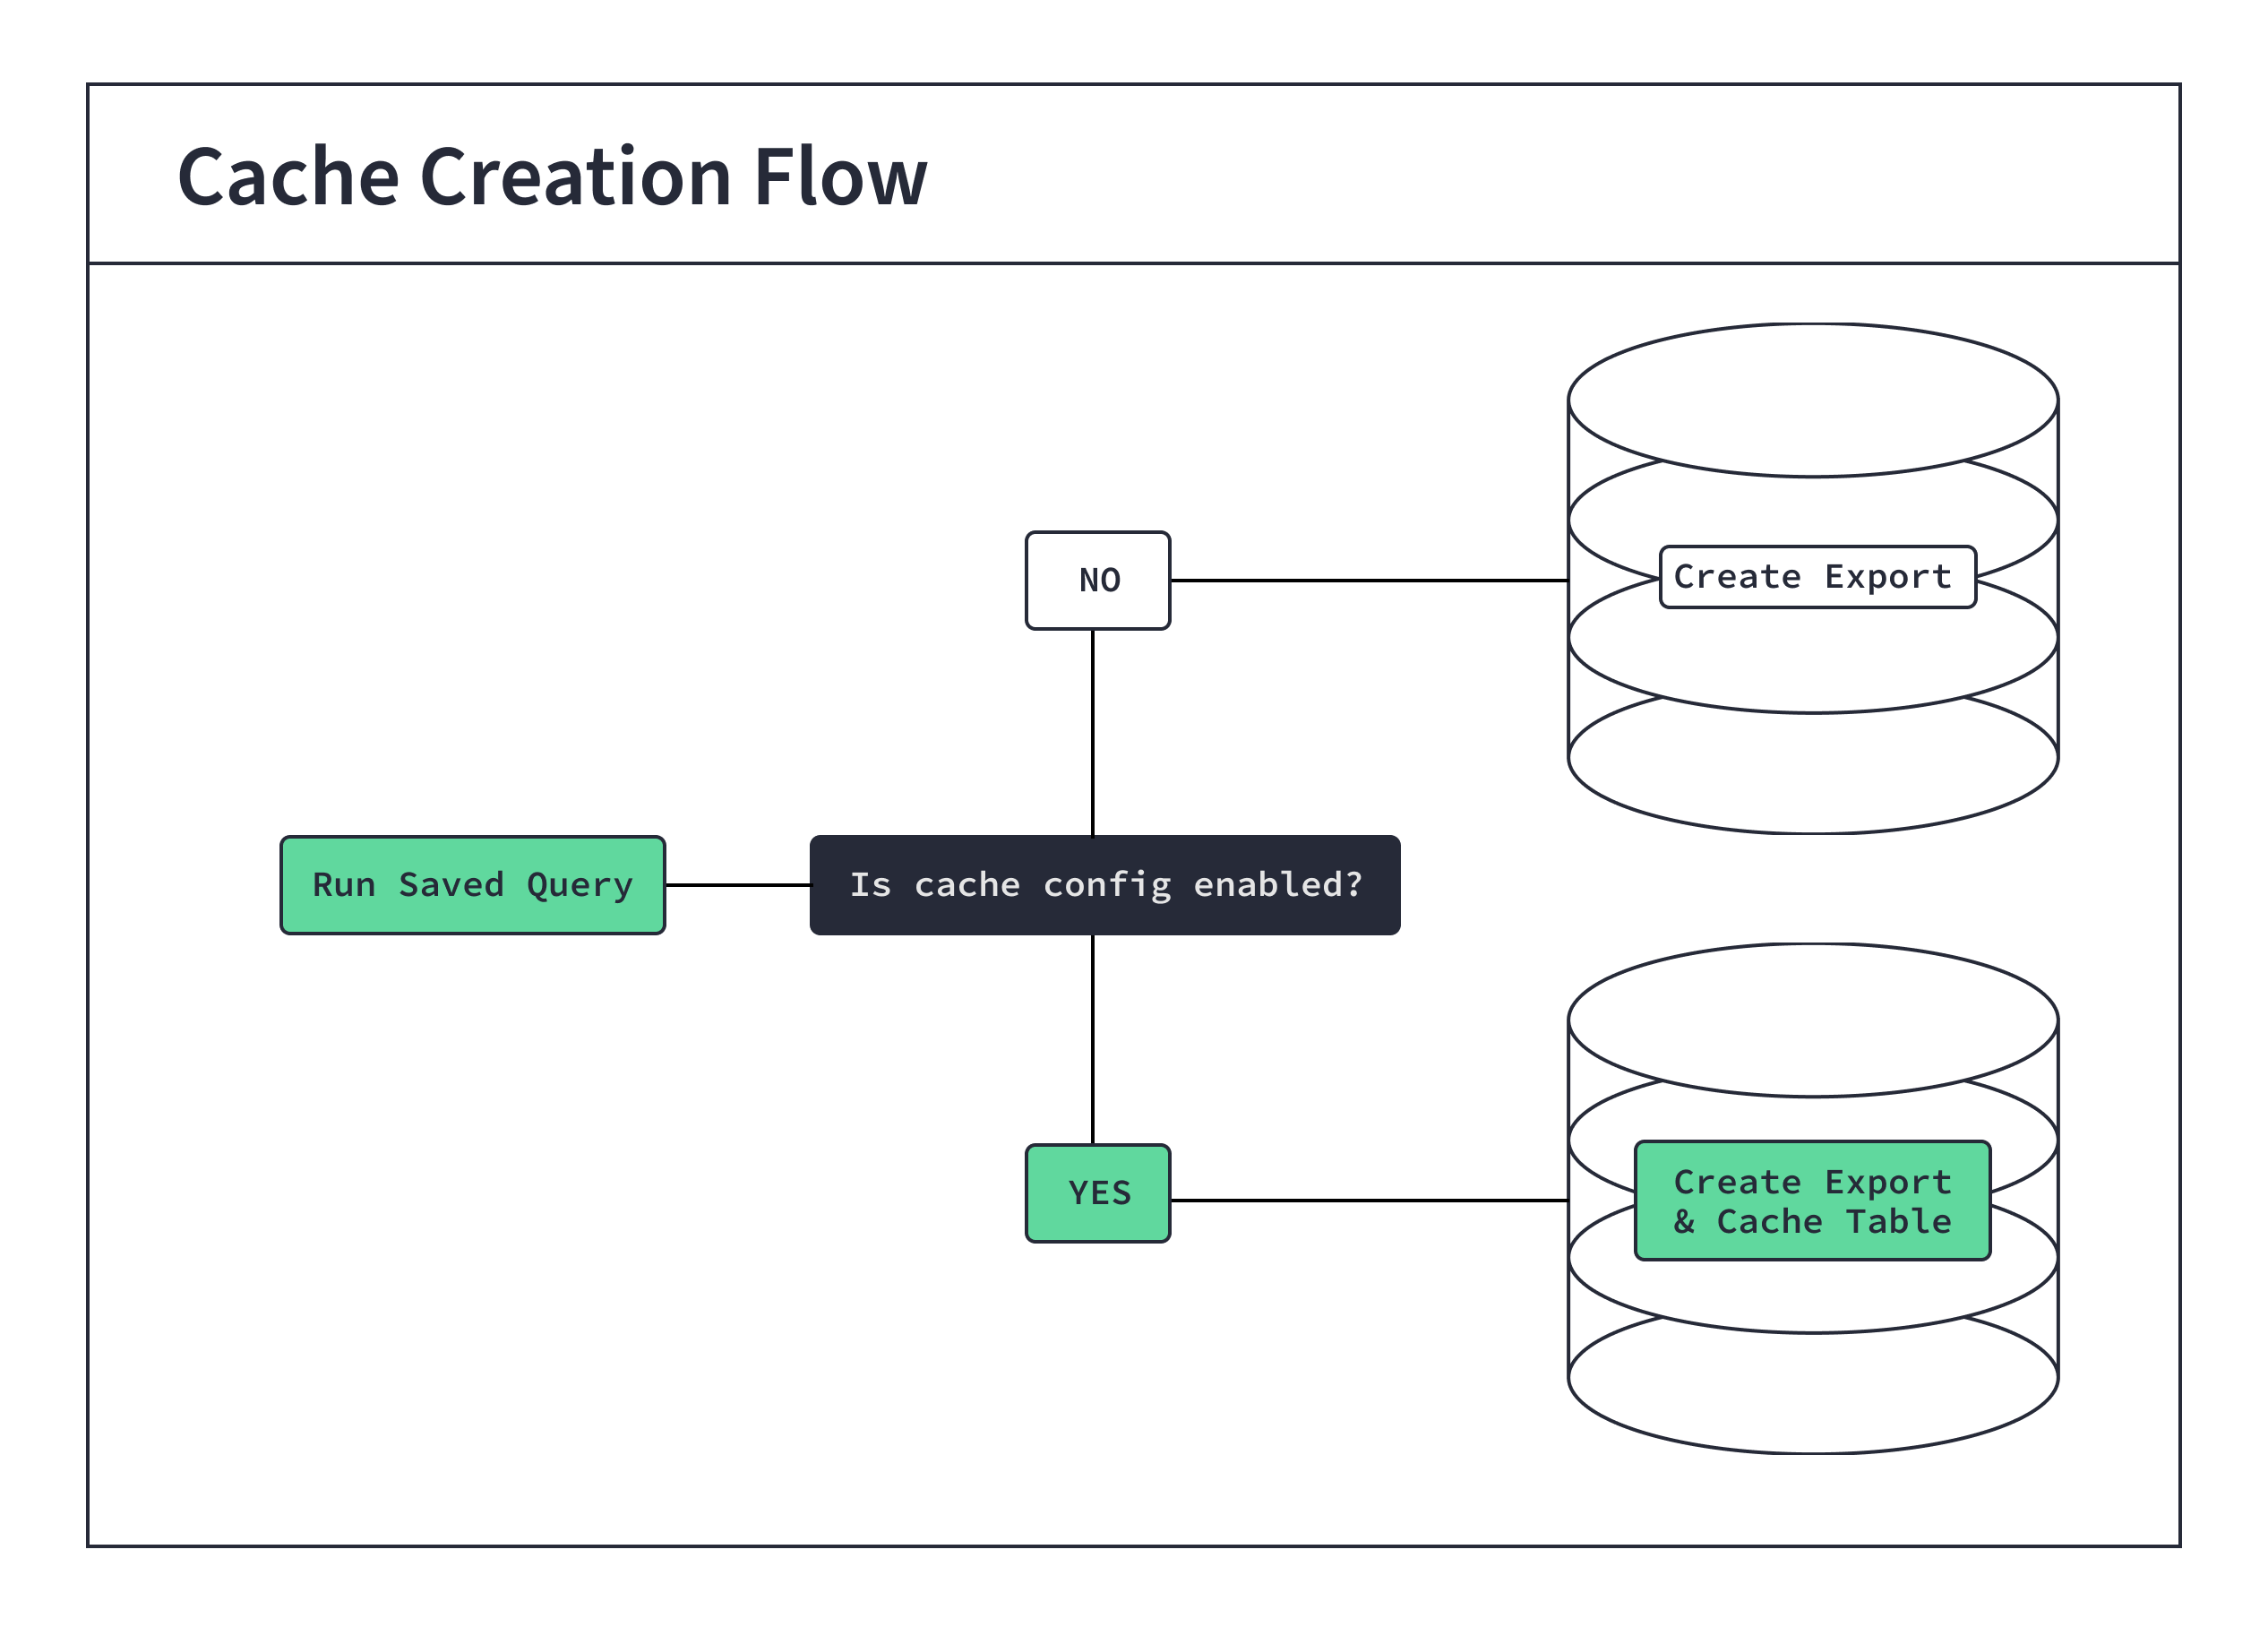 Overview of the cache creation flow.